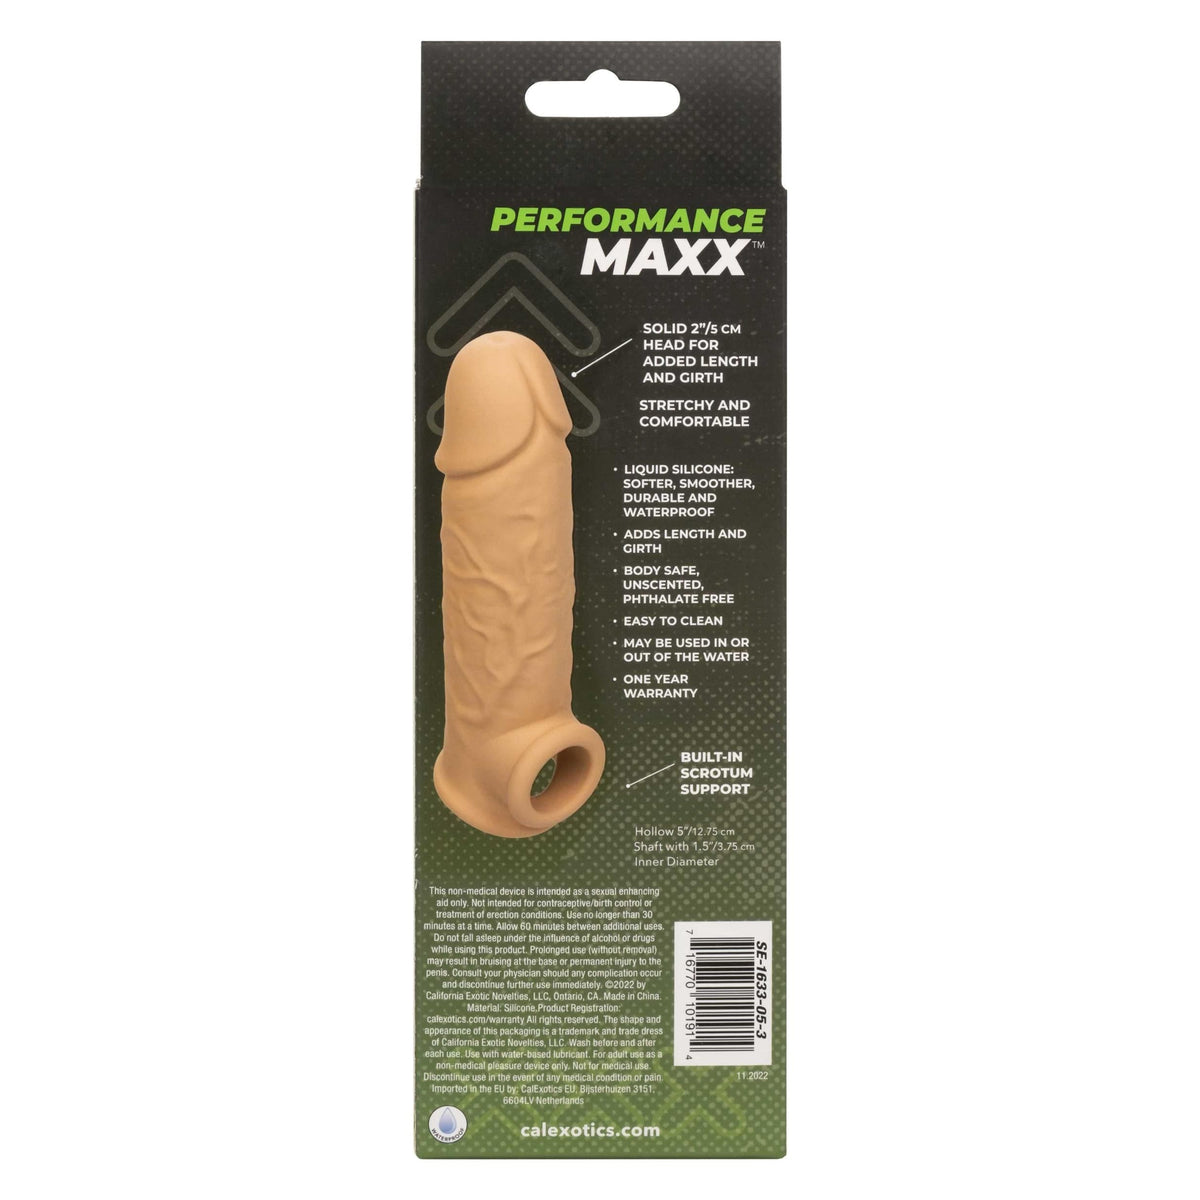 performance maxx life like extension 7 inch ivory